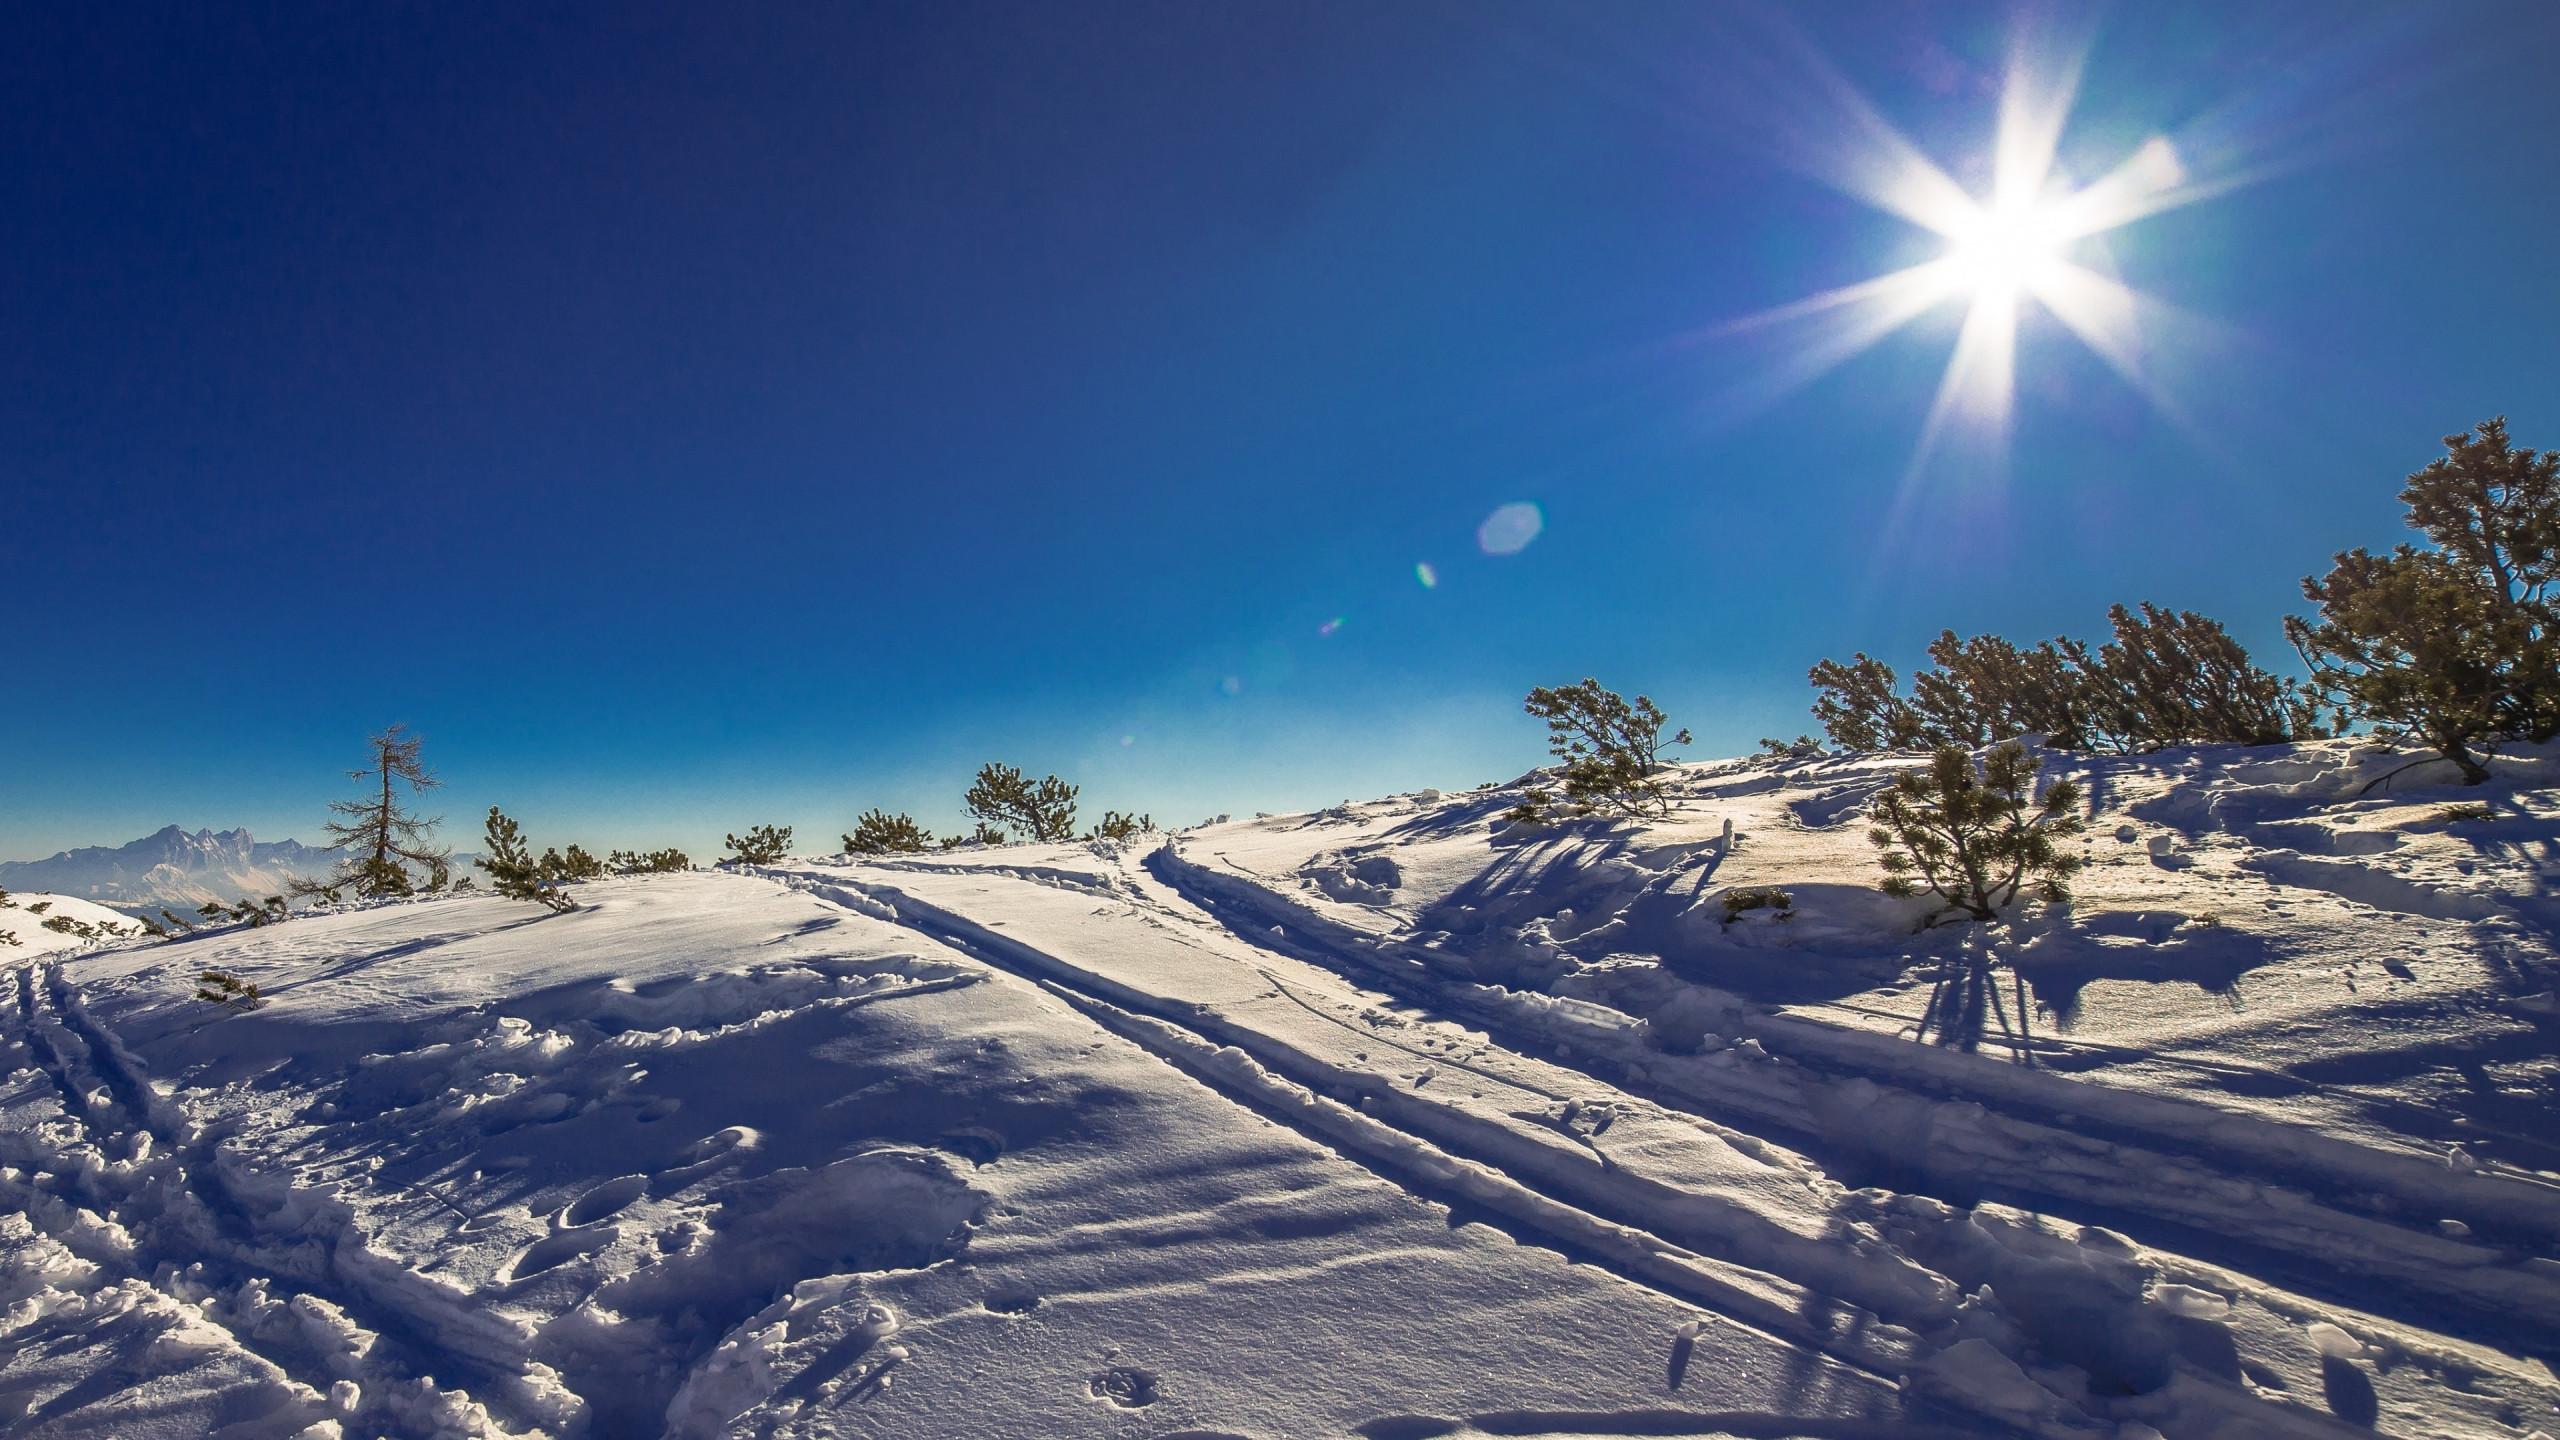 Download wallpaper: Sunny day in this Winter landscape 2560x1440